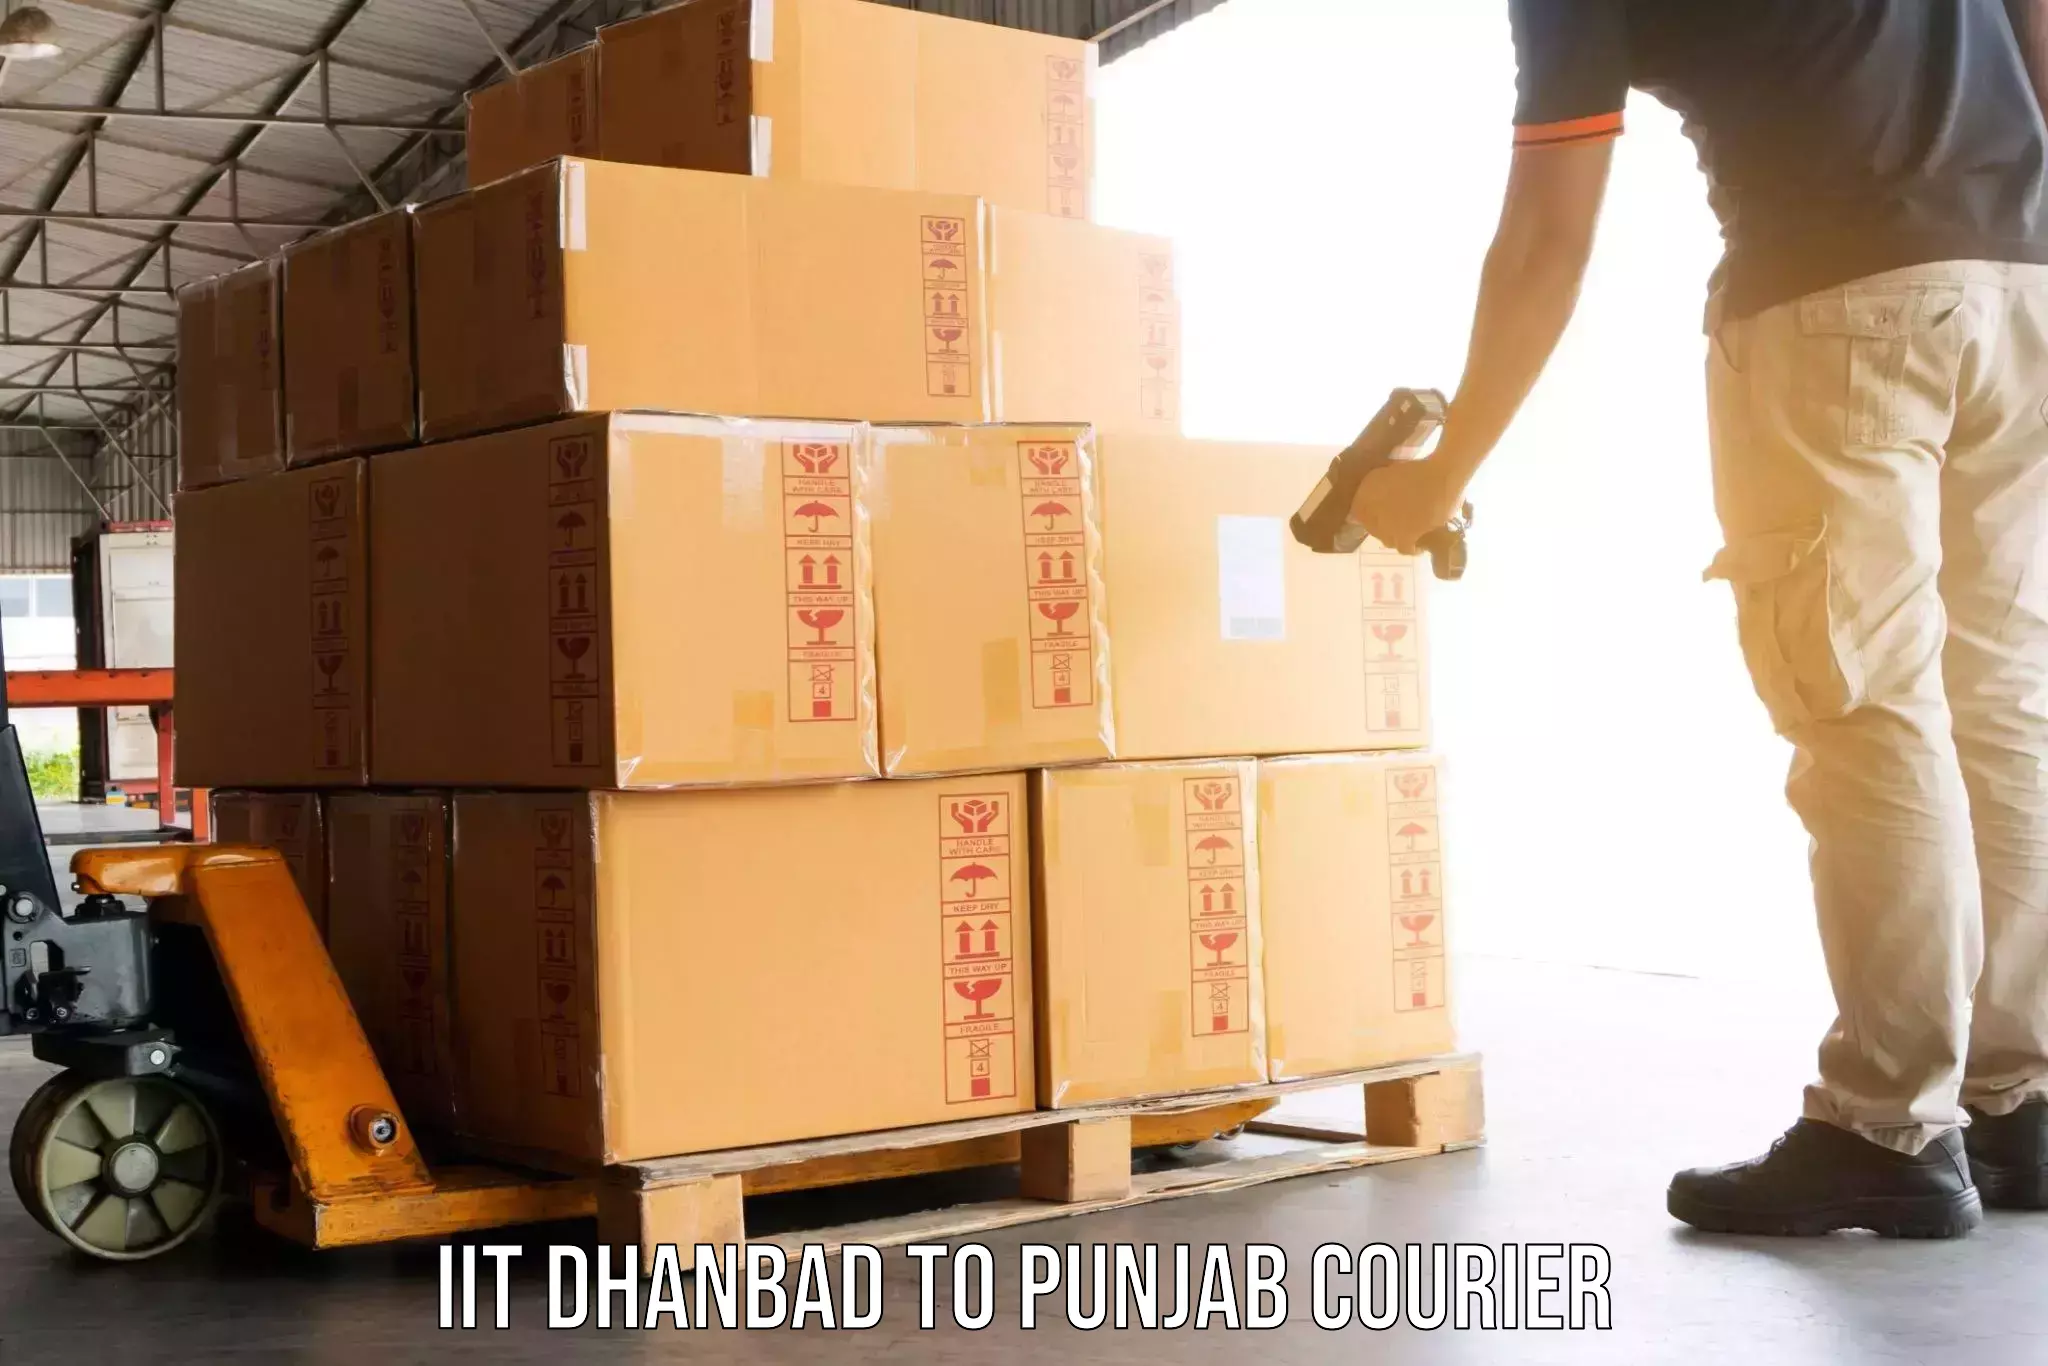 Professional moving assistance IIT Dhanbad to Punjab